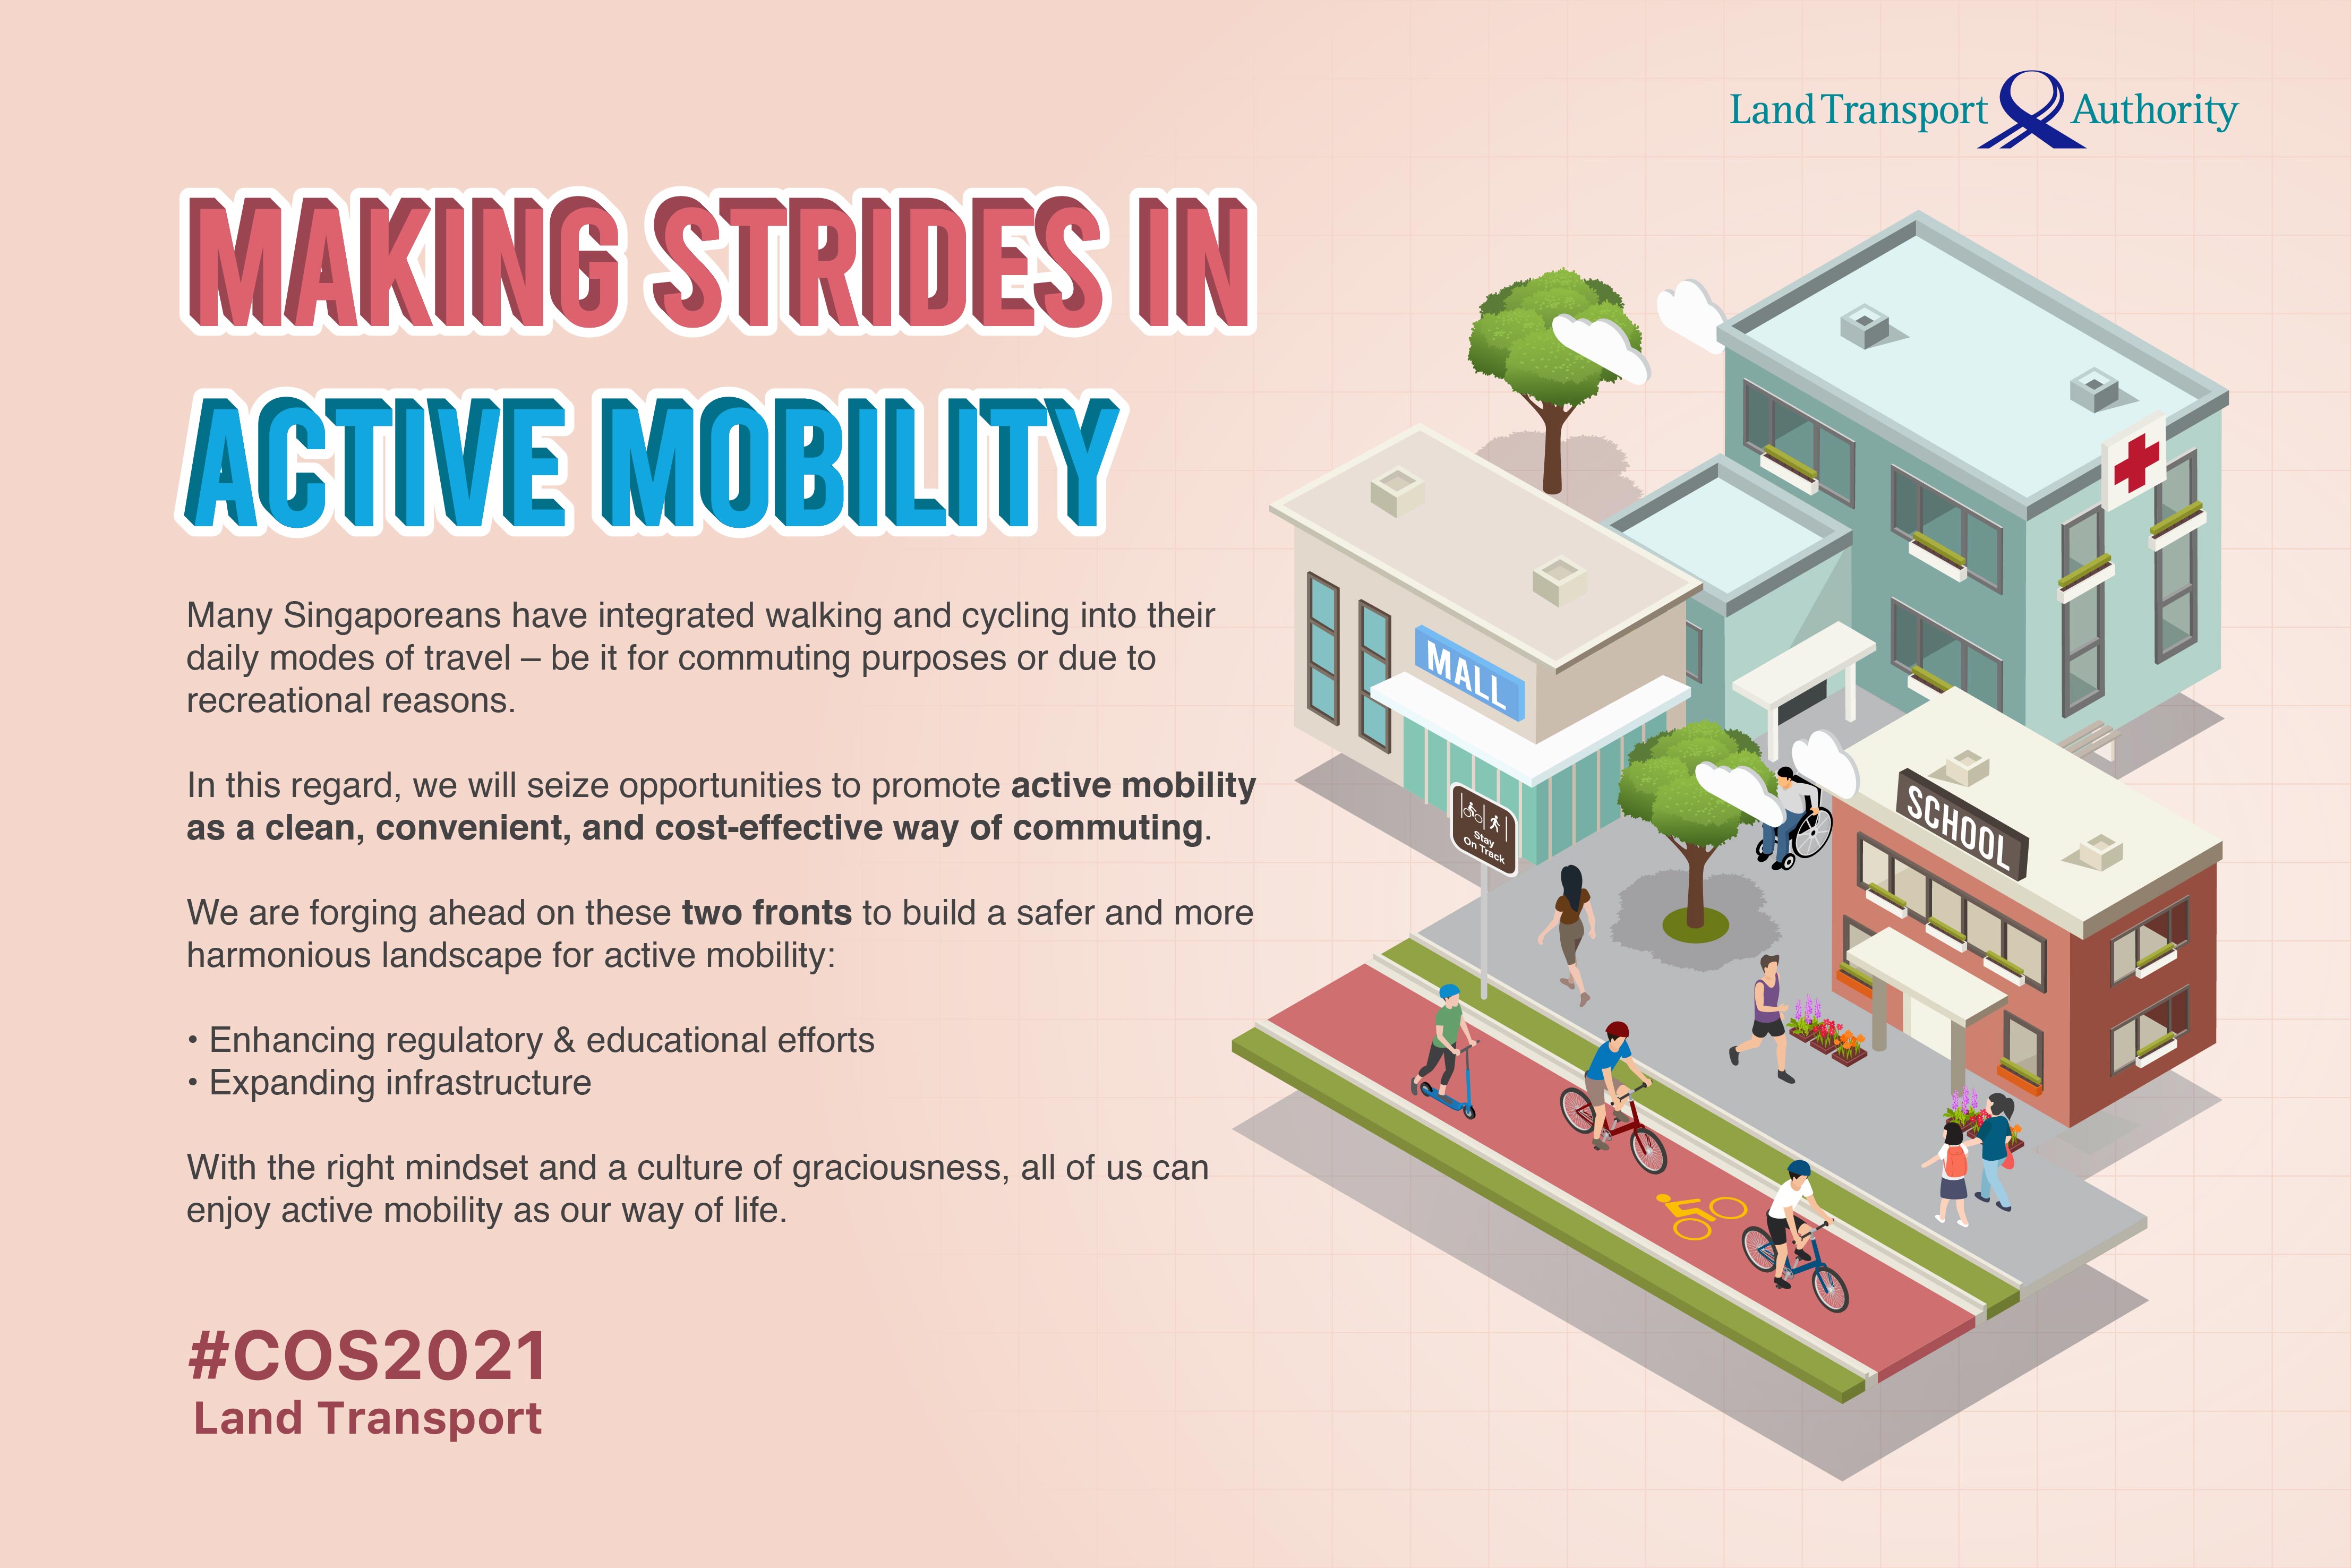 Latest Happenings - COS 2021 on Active Mobility